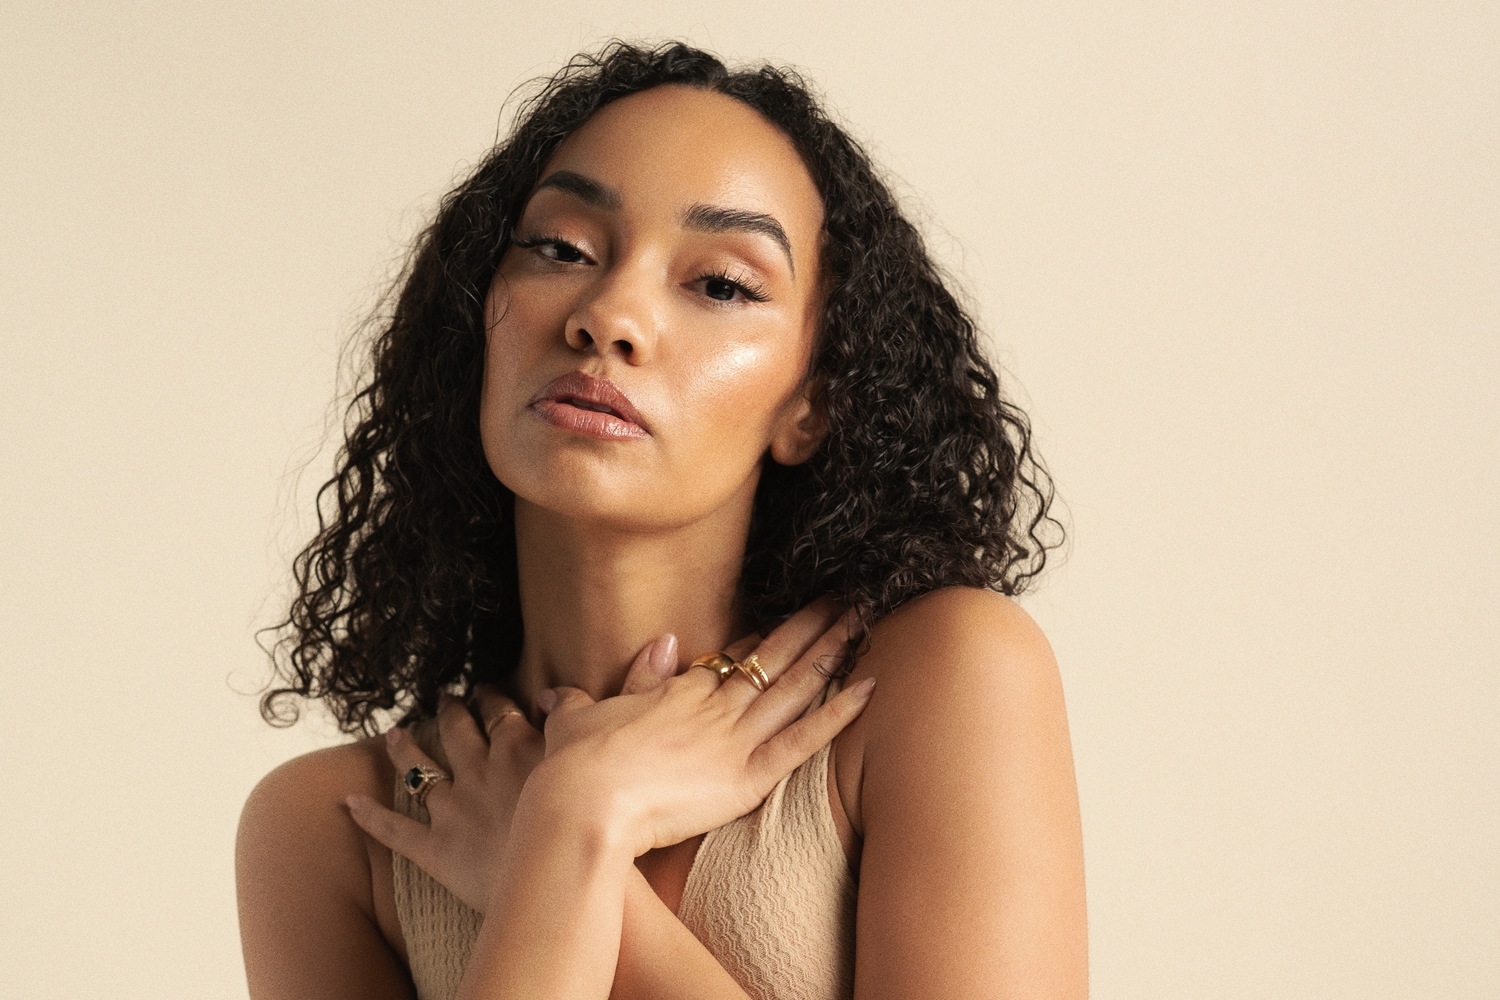 Little Mix’s Leigh-Anne announces debut solo EP ‘No Hard Feelings’